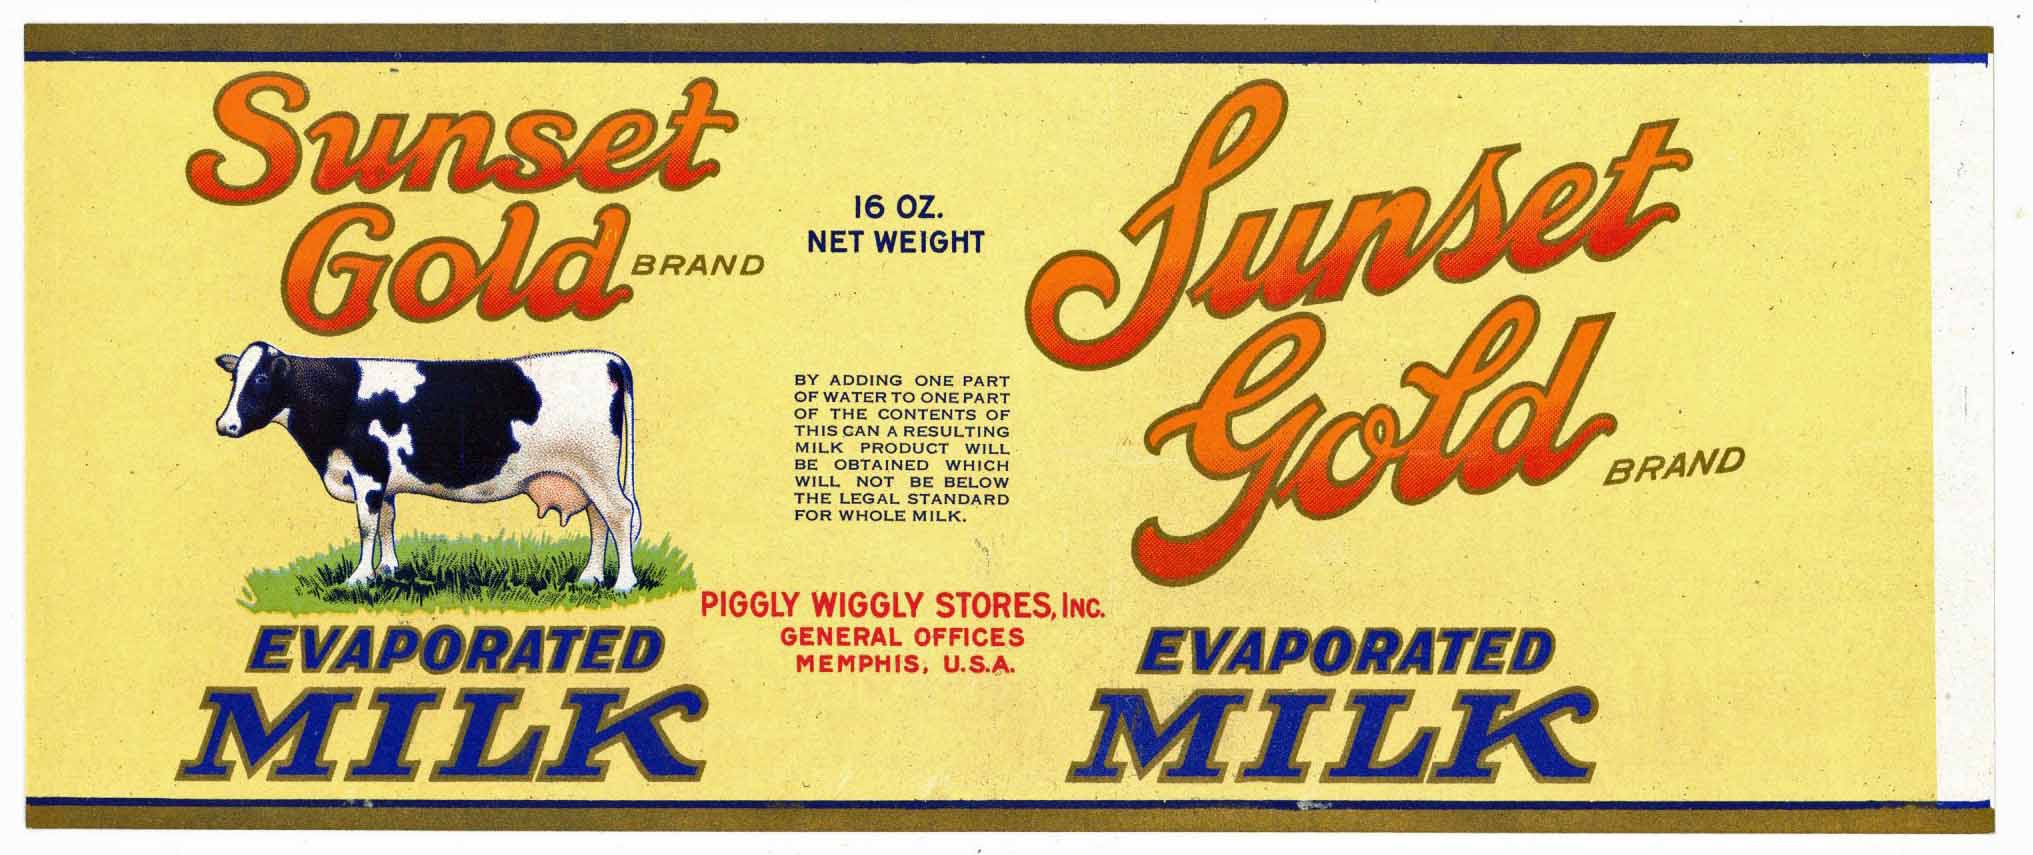 Sunset Gold Brand Vintage Piggly Wiggly Store Milk Can Label